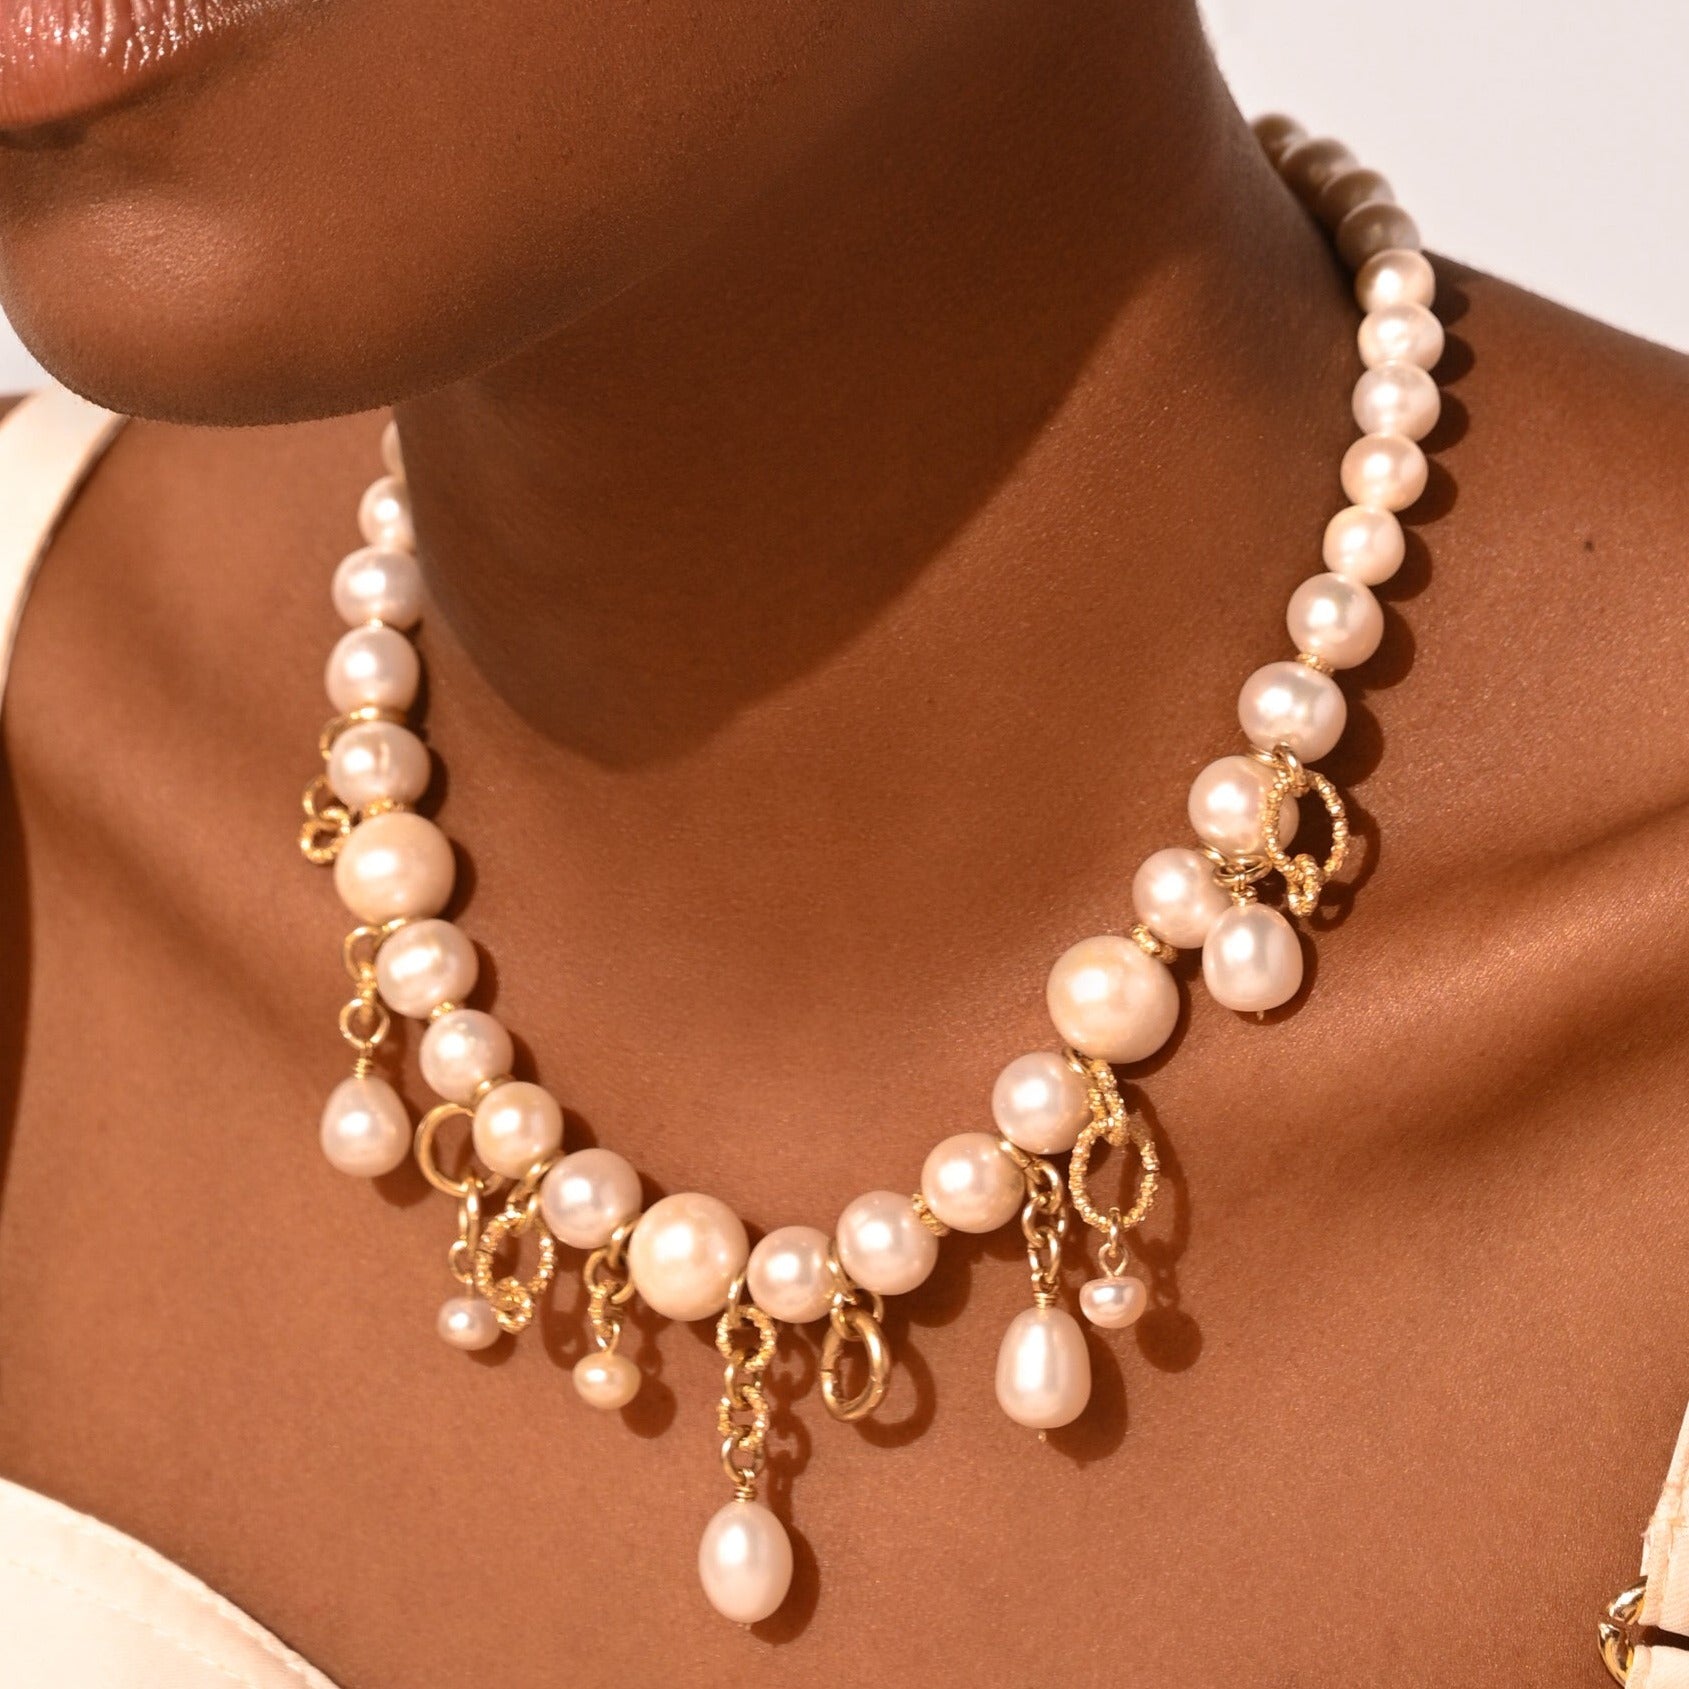 Cubagua Necklace #08 - Pearls Necklaces TARBAY   